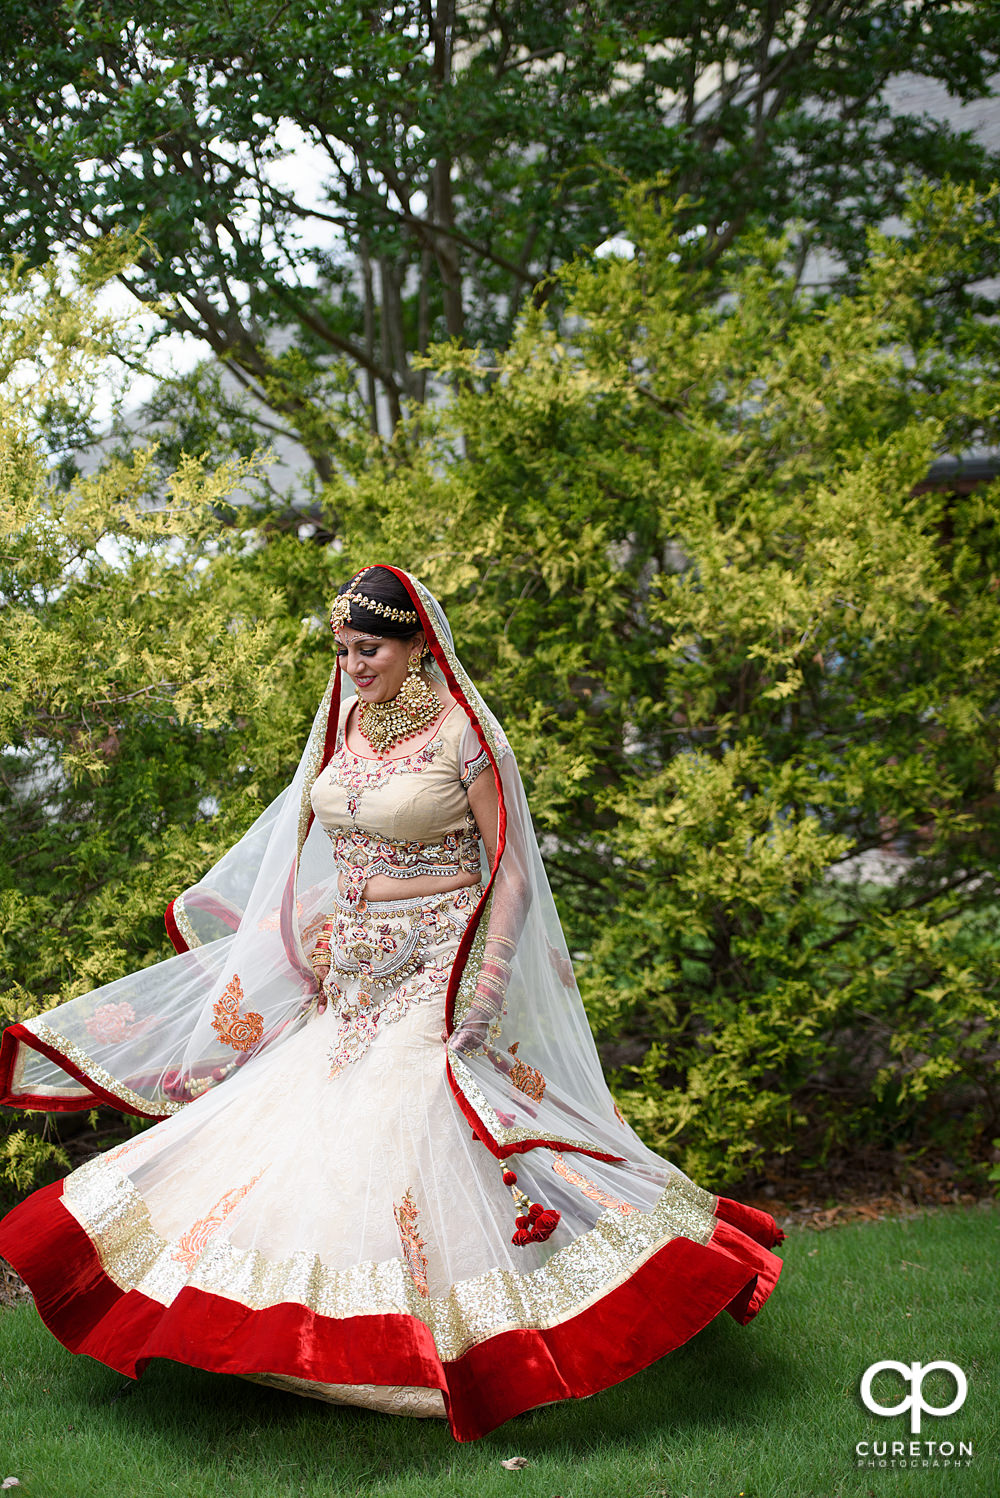 Indian bride twirling in her dress.